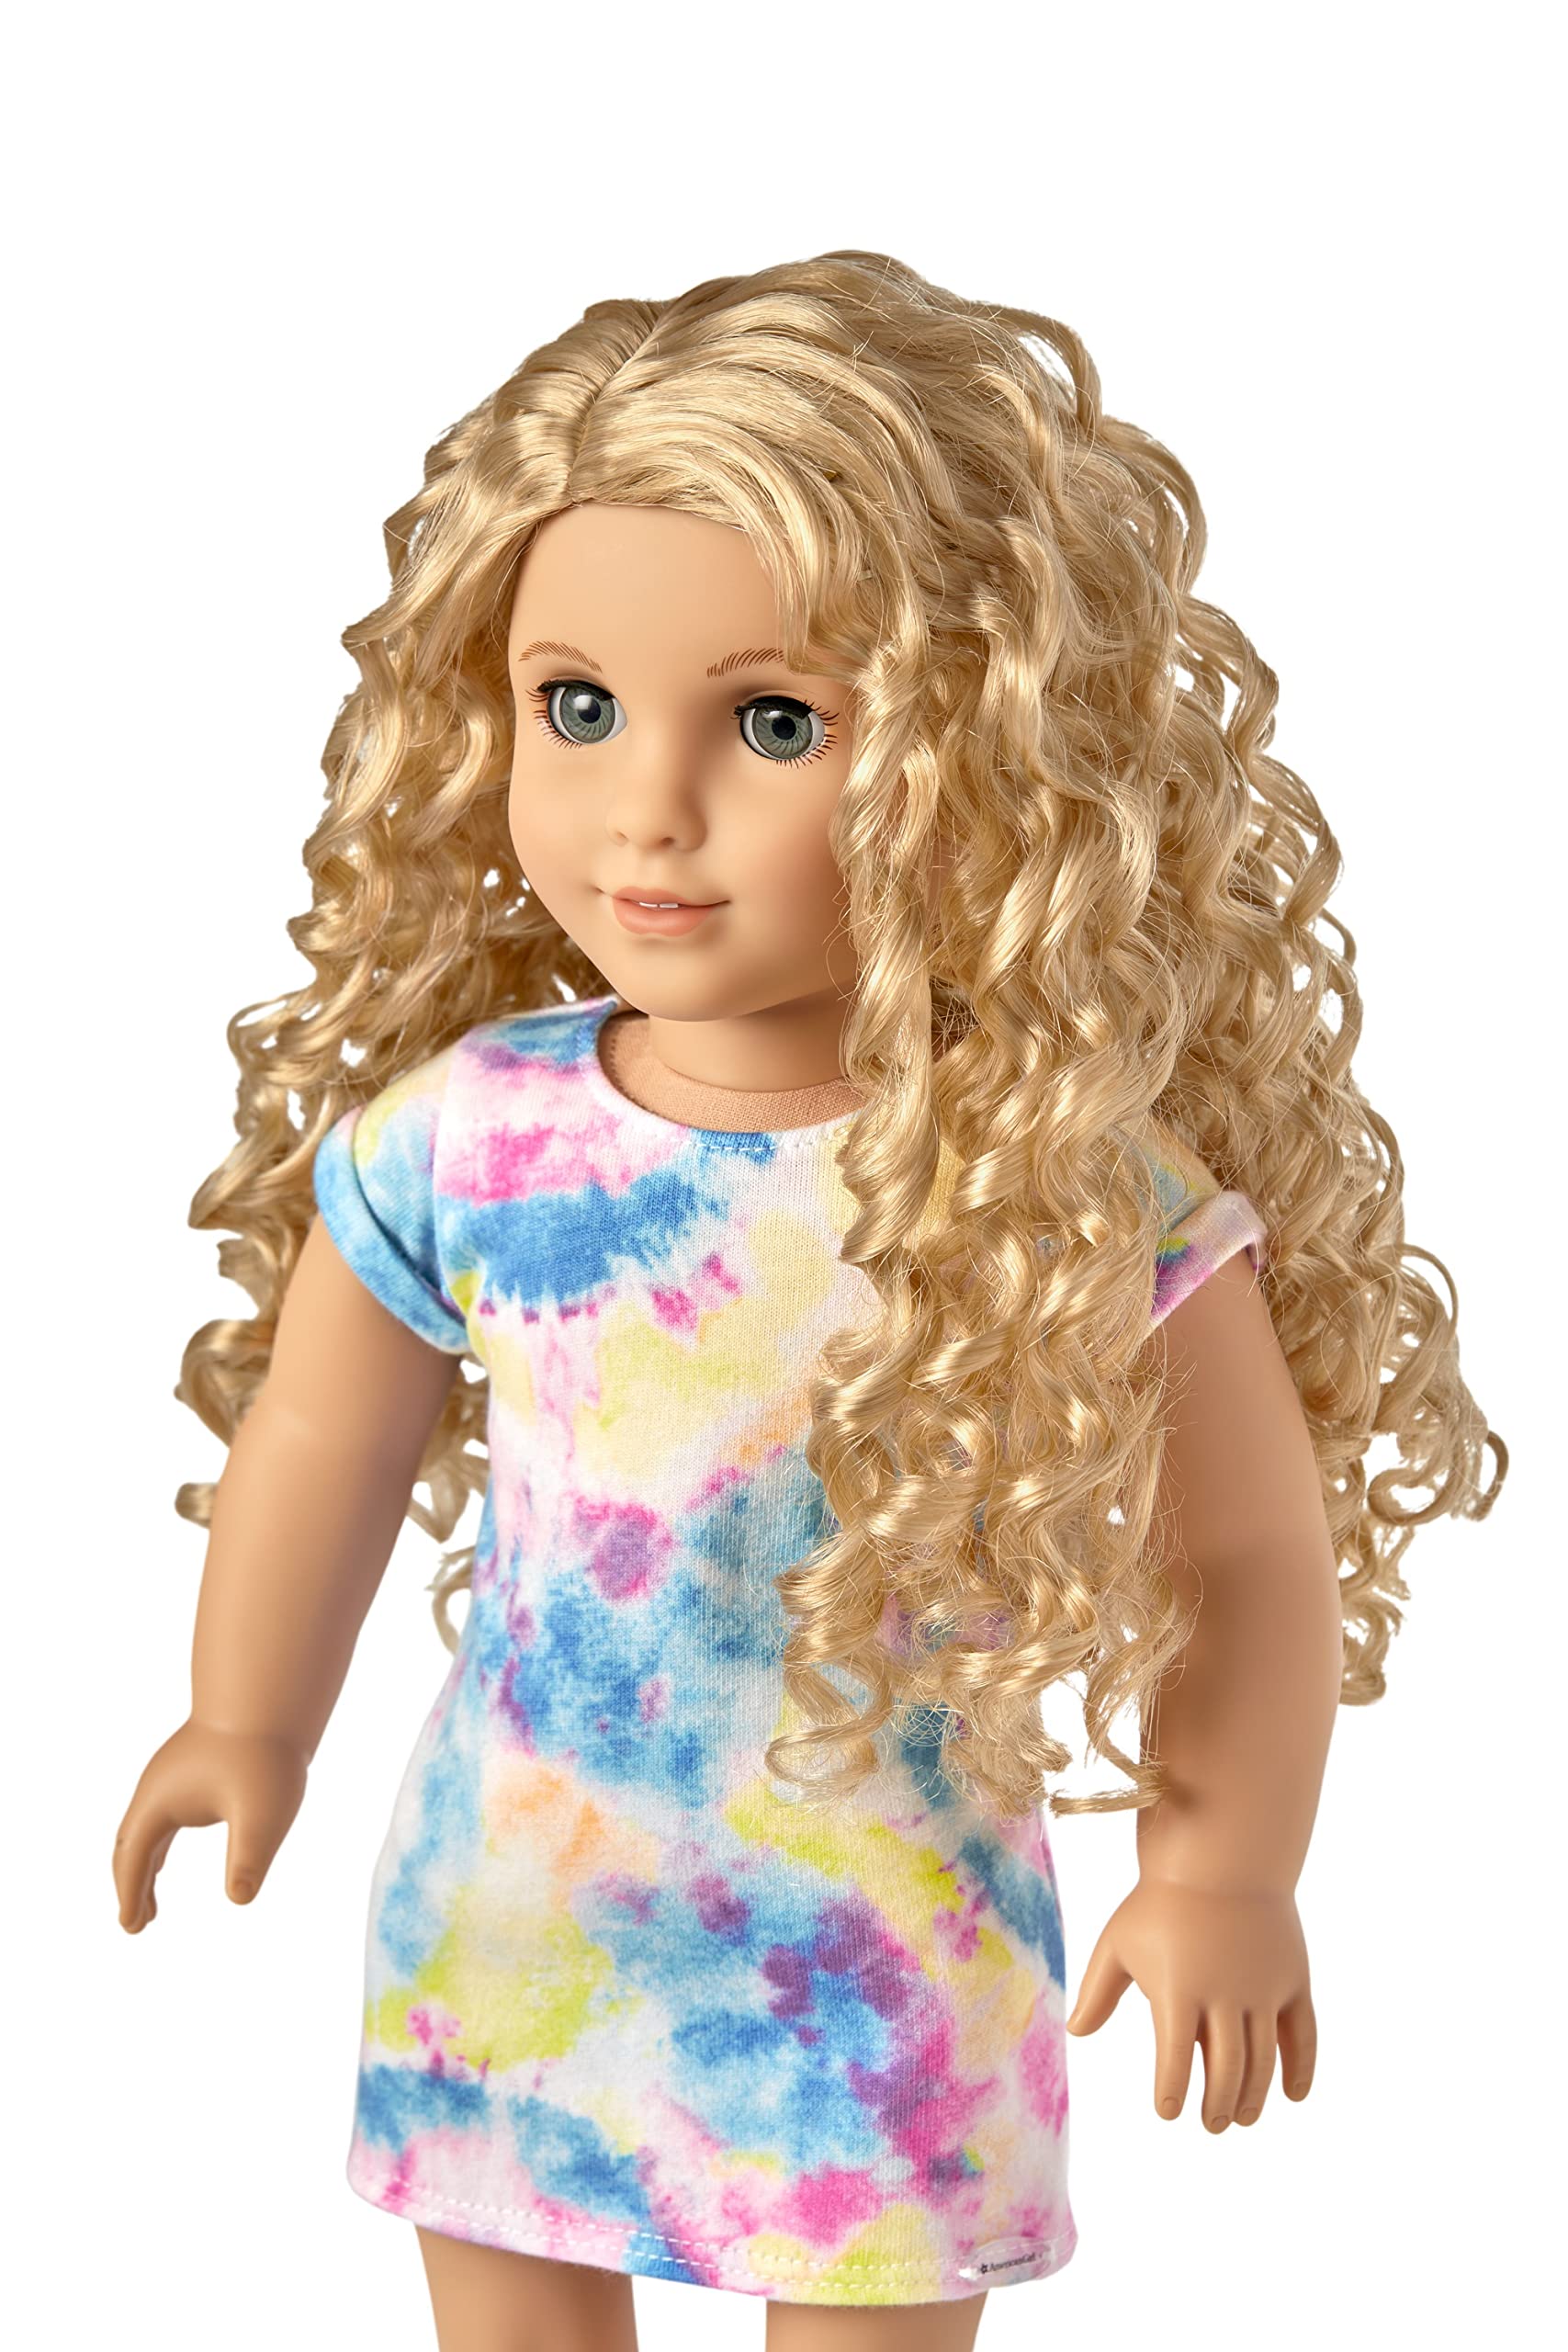 American Girl Truly Me 18-inch Doll #115 with Gray Eyes, Curly Blonde Hair, Light Skin, Tie Dye T-shirt Dress, For Ages 6+